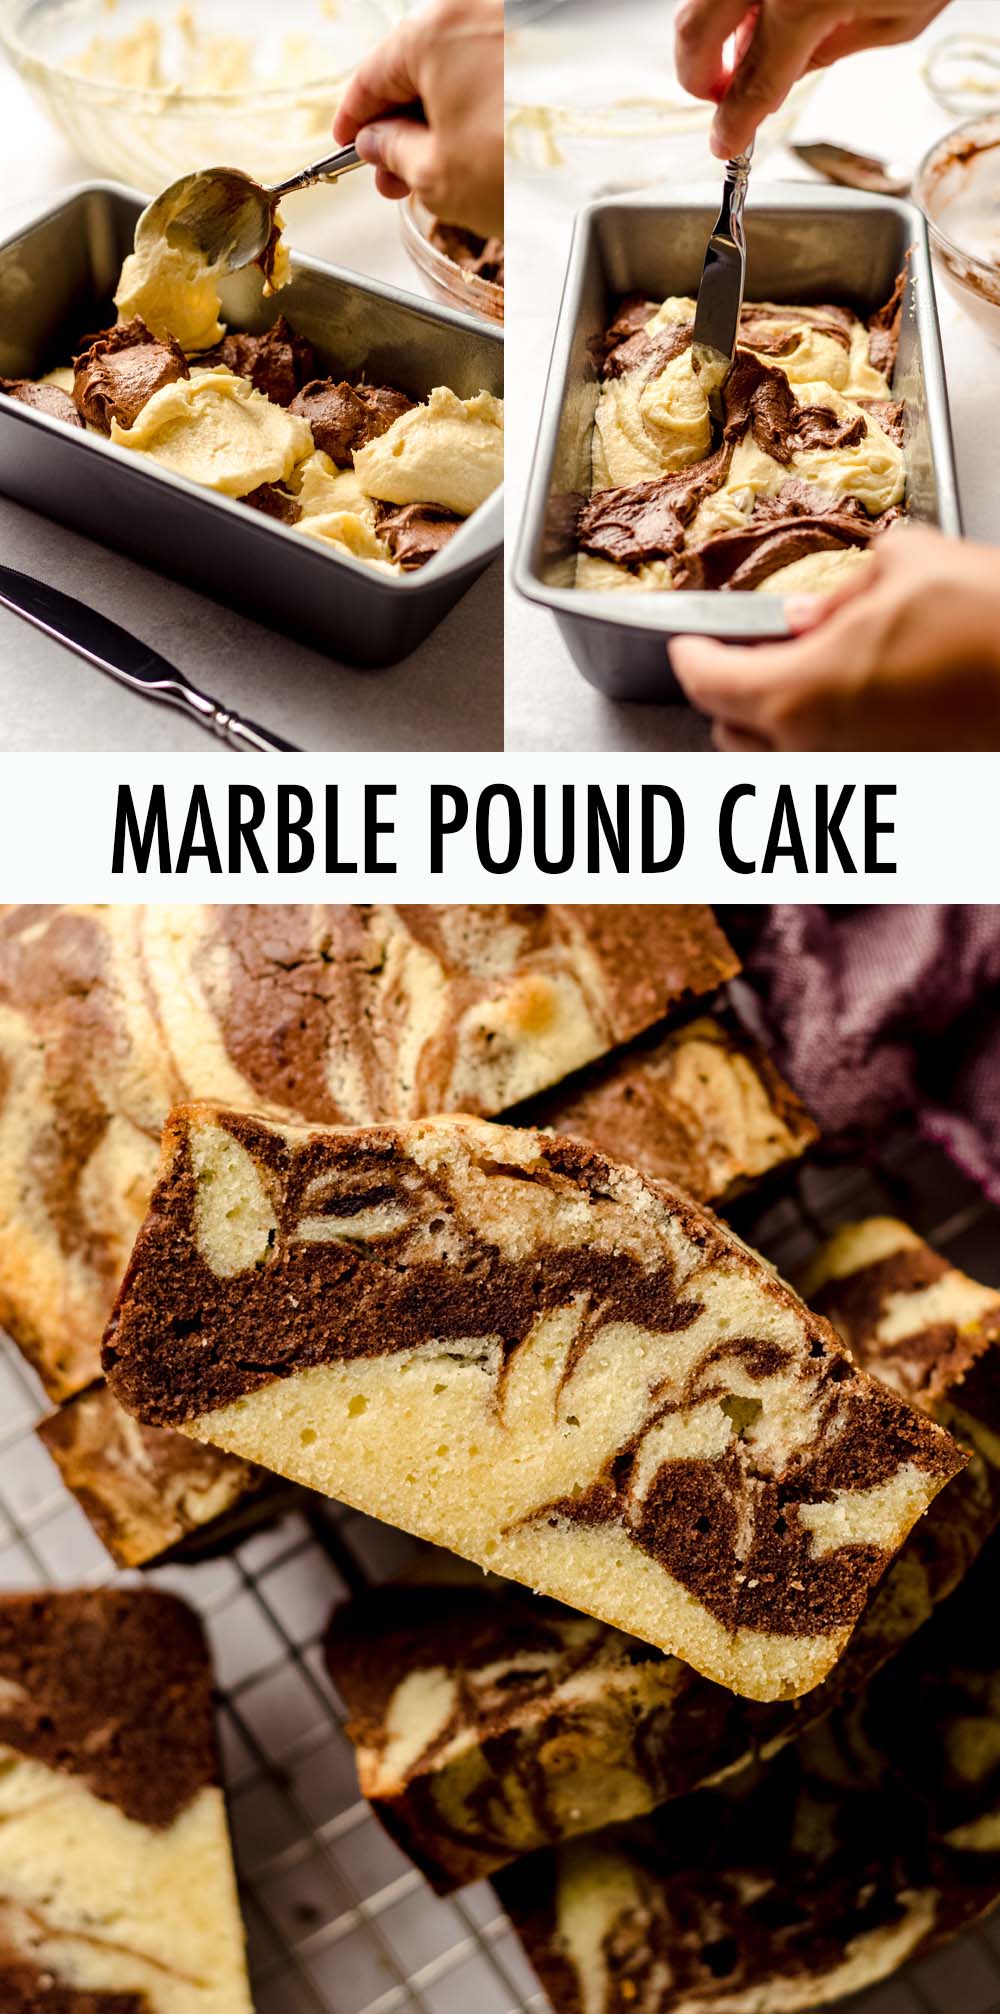 This marble pound cake is buttery and rich with a very tight crumb. The simple base flavor of butter and vanilla is an excellent complementary taste to the slightly bitter chocolate swirled into every bite. via @frshaprilflours